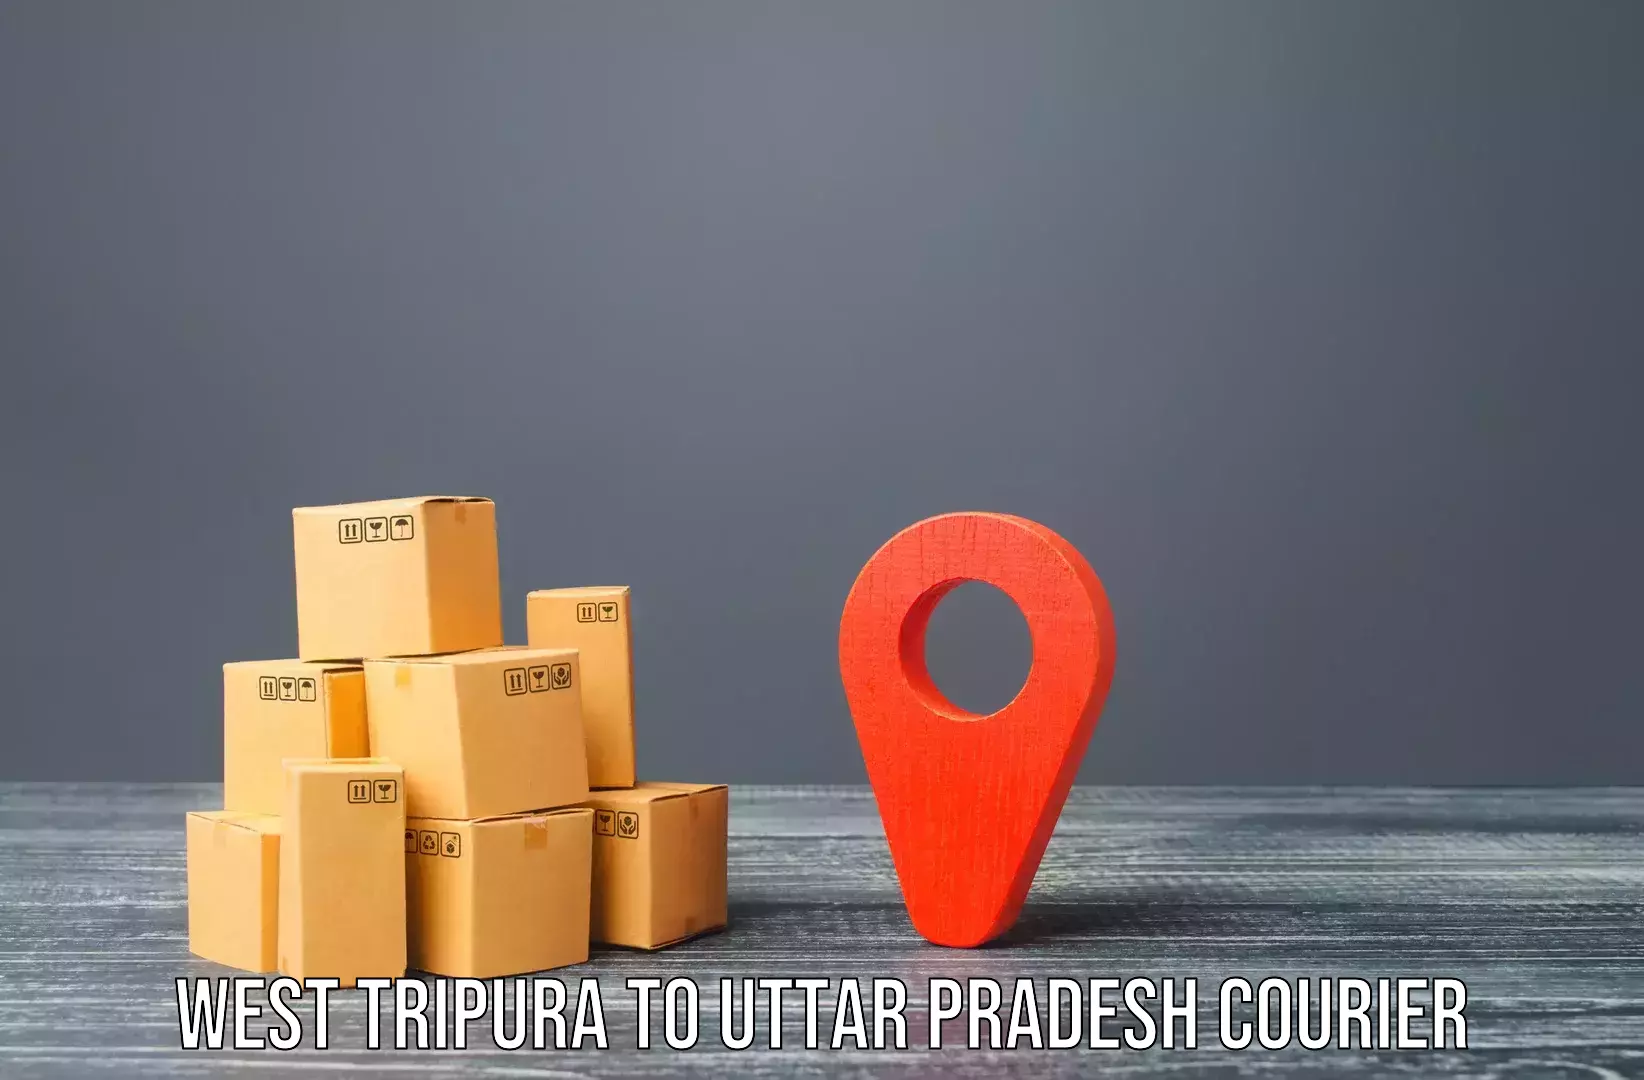 Efficient moving and packing in West Tripura to Hathras